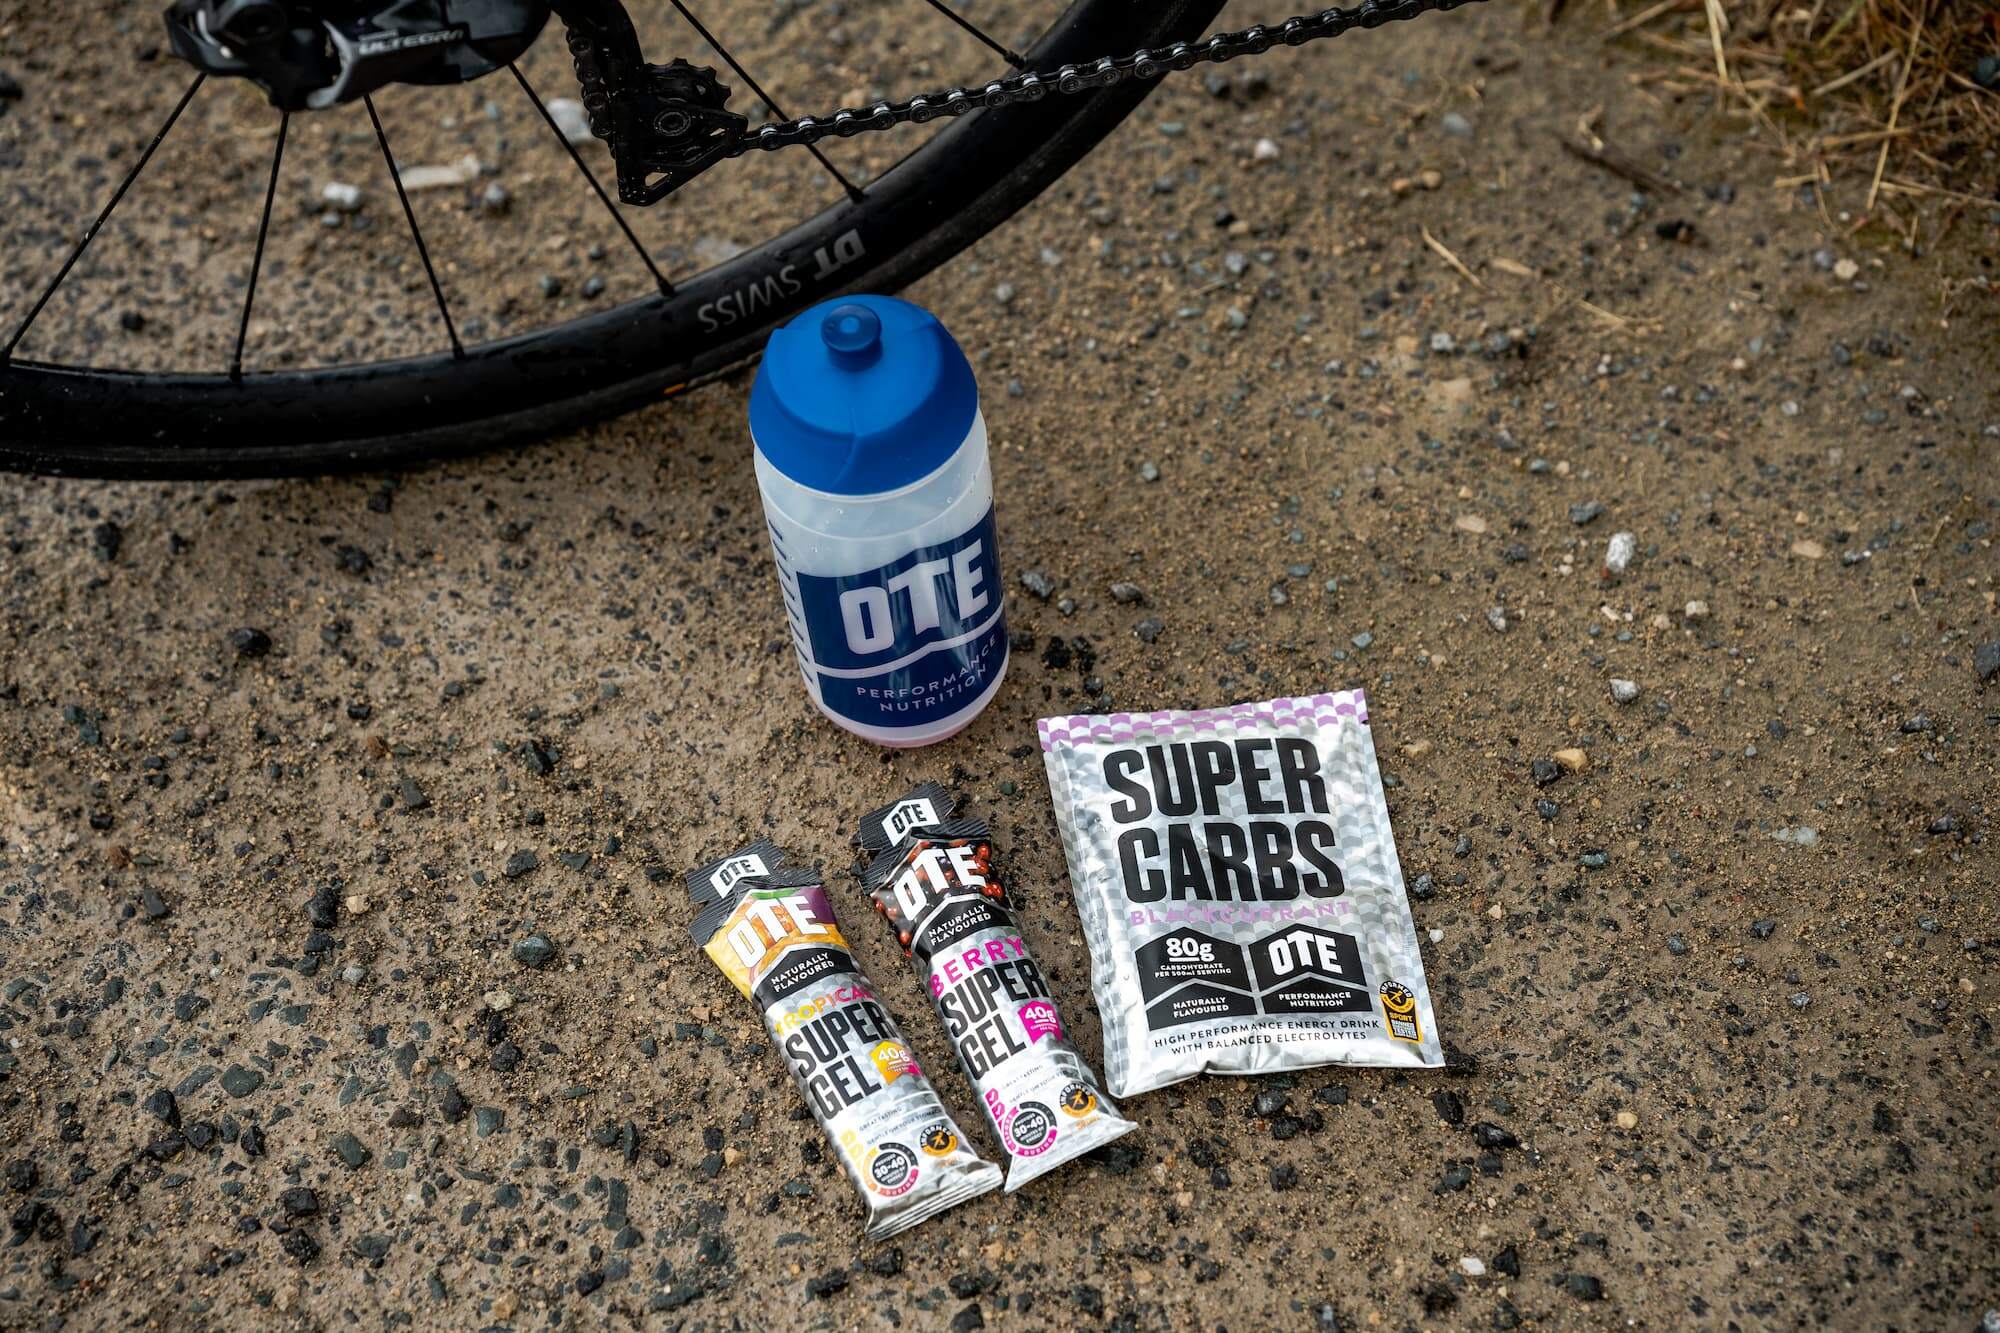 OTE Sports energy gels and drink sachet placed next to a bike.